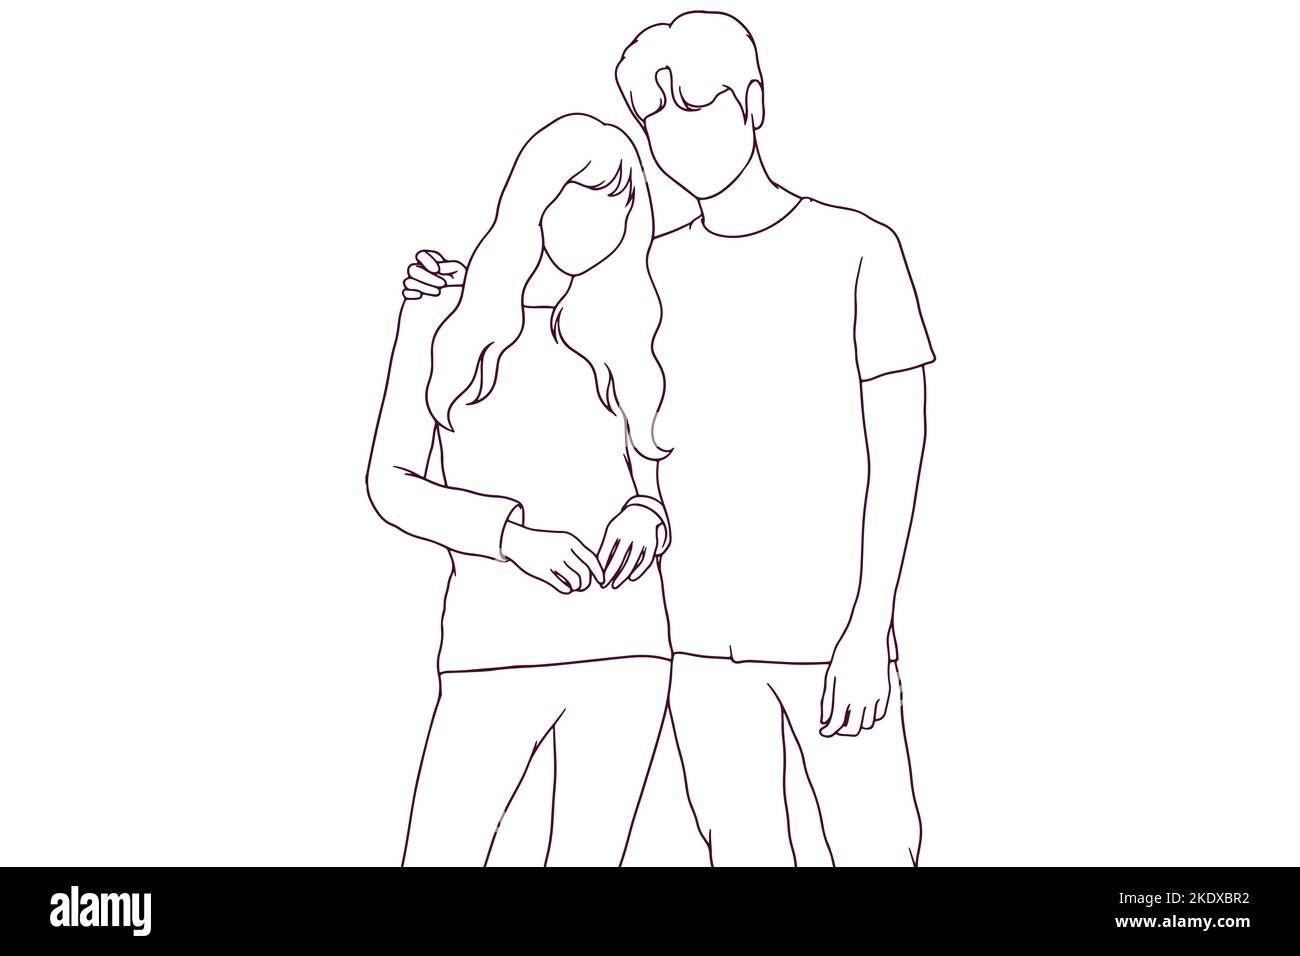 young couple hand drawn style vector illustration Stock Vector